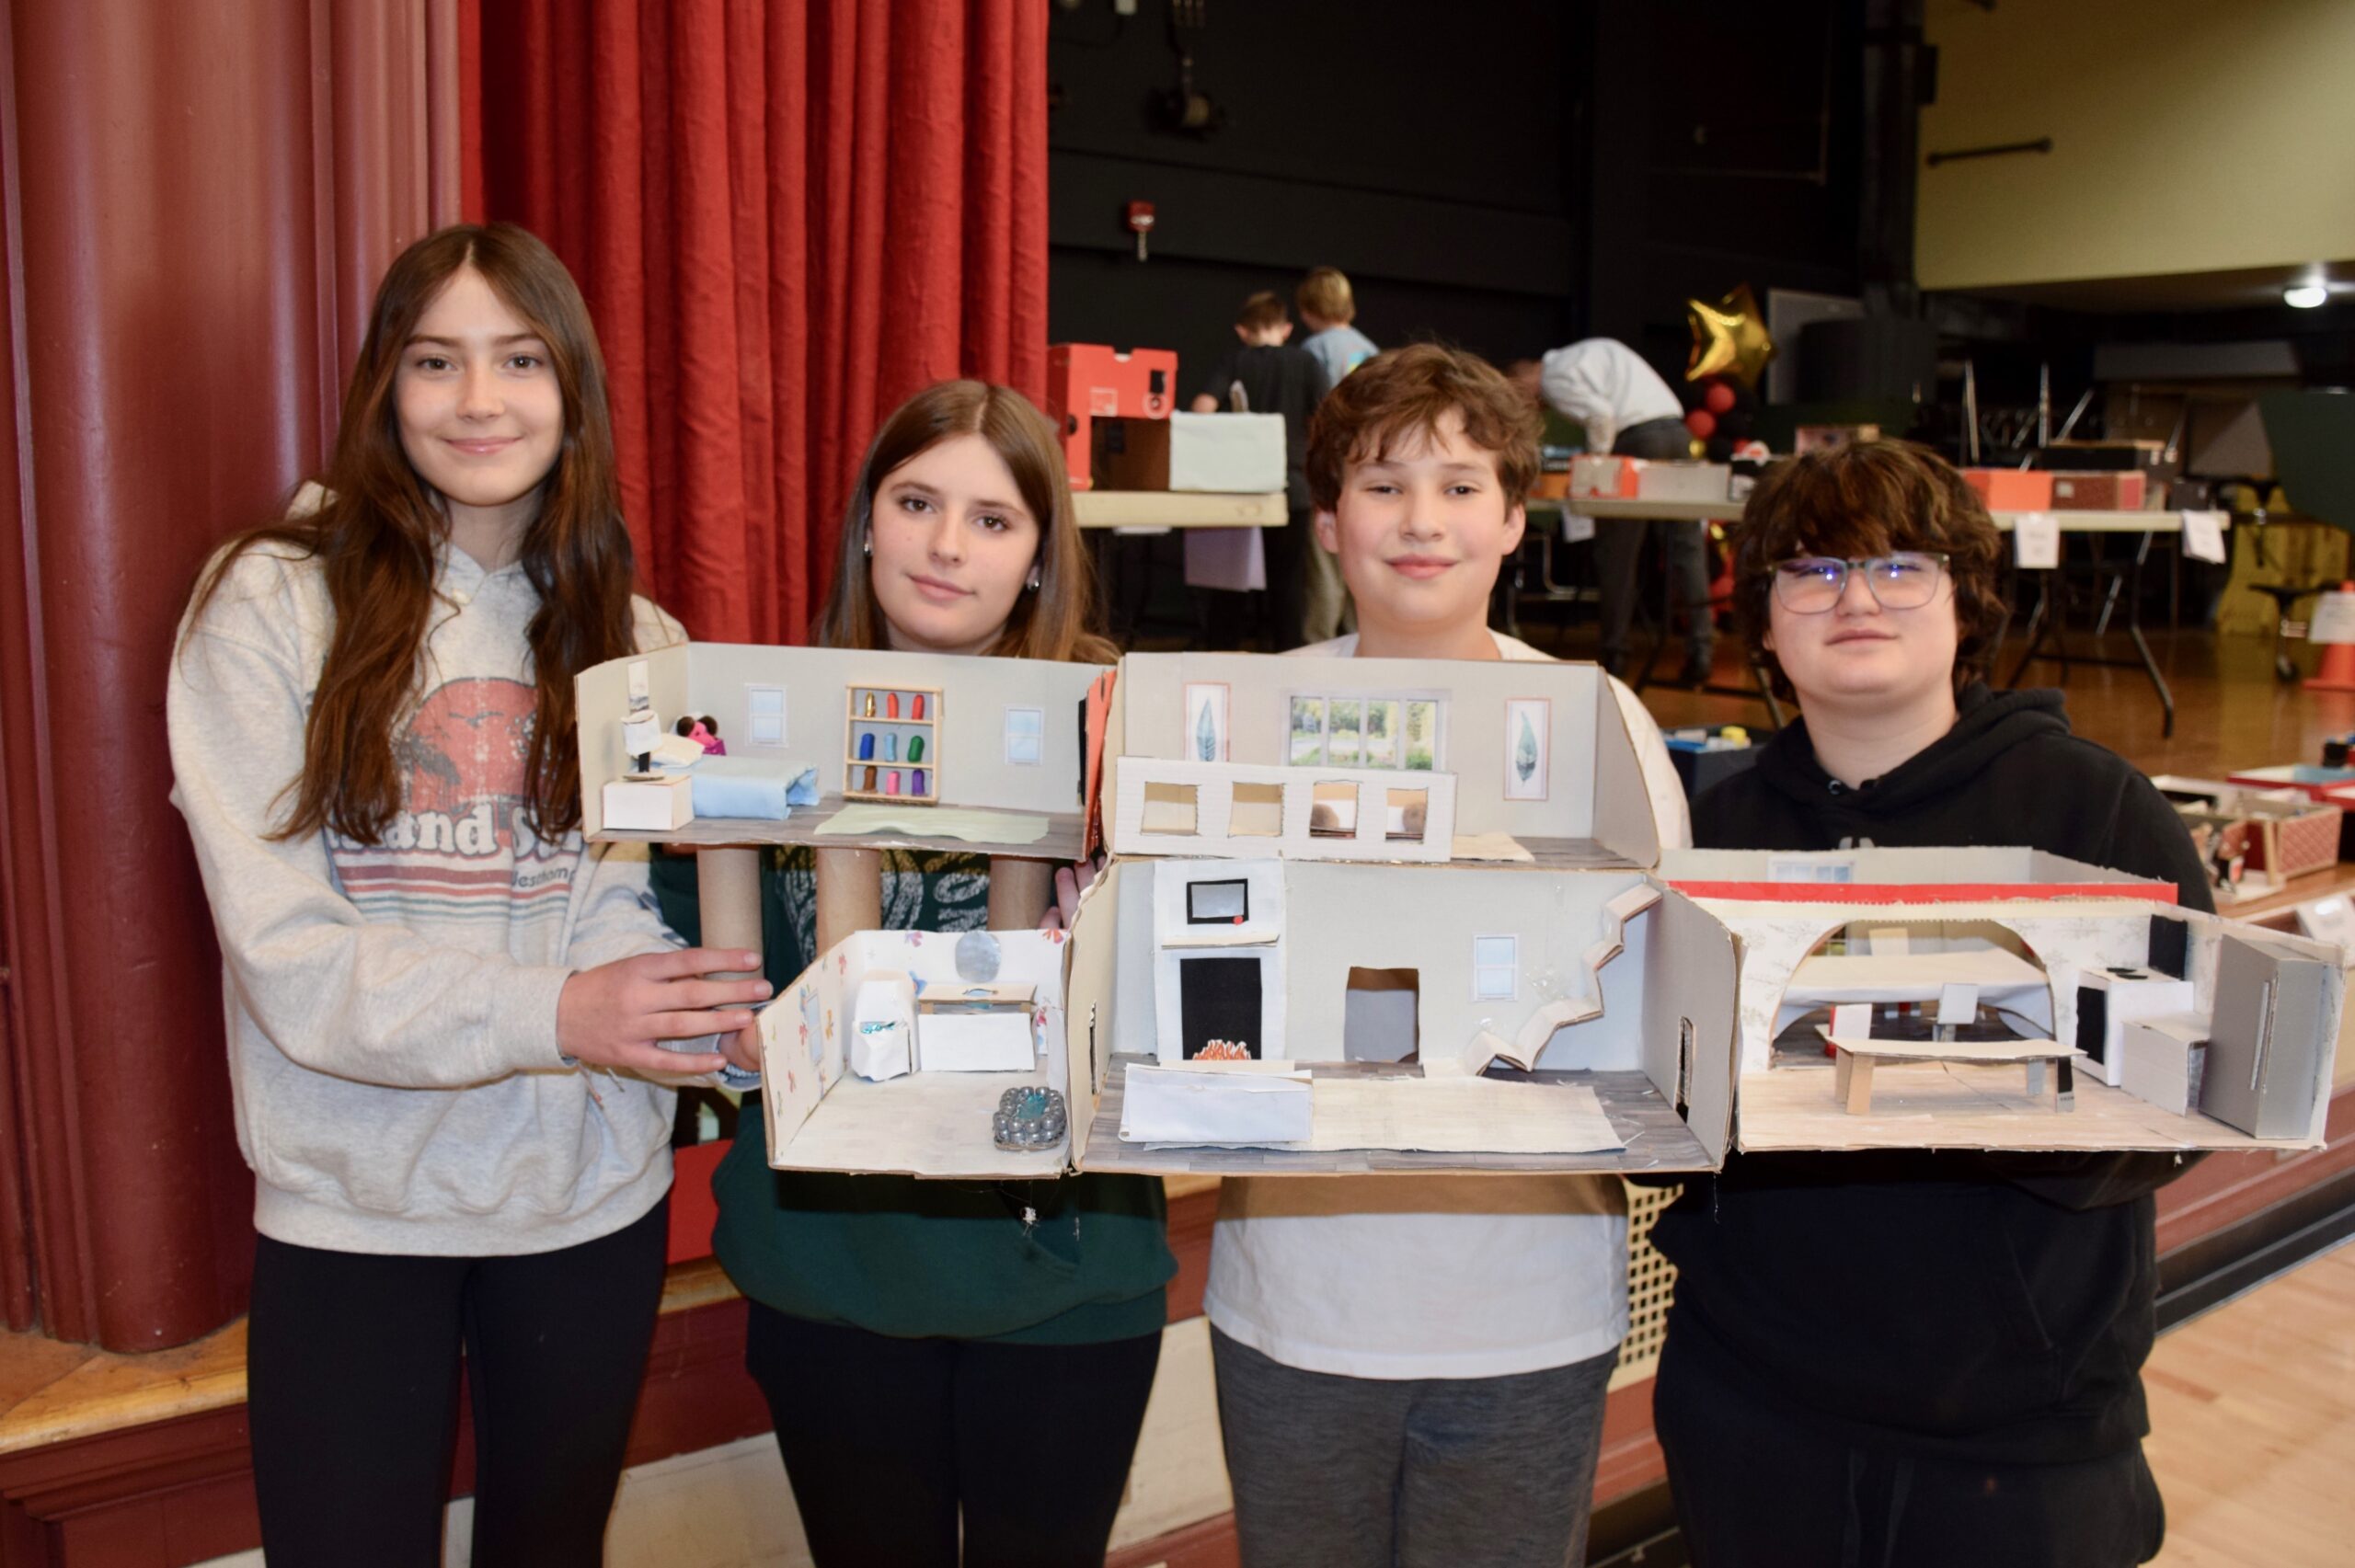 Westhampton Beach Middle School students in Kathleen Ciancio’s seventh grade family and consumer sciences class recently created interior design projects. For the hands-on project, the students worked in groups to sketch drawings of the layout of their homes and then used shoeboxes, craft supplies and recycled materials to complete the projects, which were then displayed in the school cafeteria.  From left,  Chloe Blowes, Penelope Huhn, William Sultan and Aaron Weidel. COURTESY WESTHAMPTON BEACH SCHOOL DISTRICT